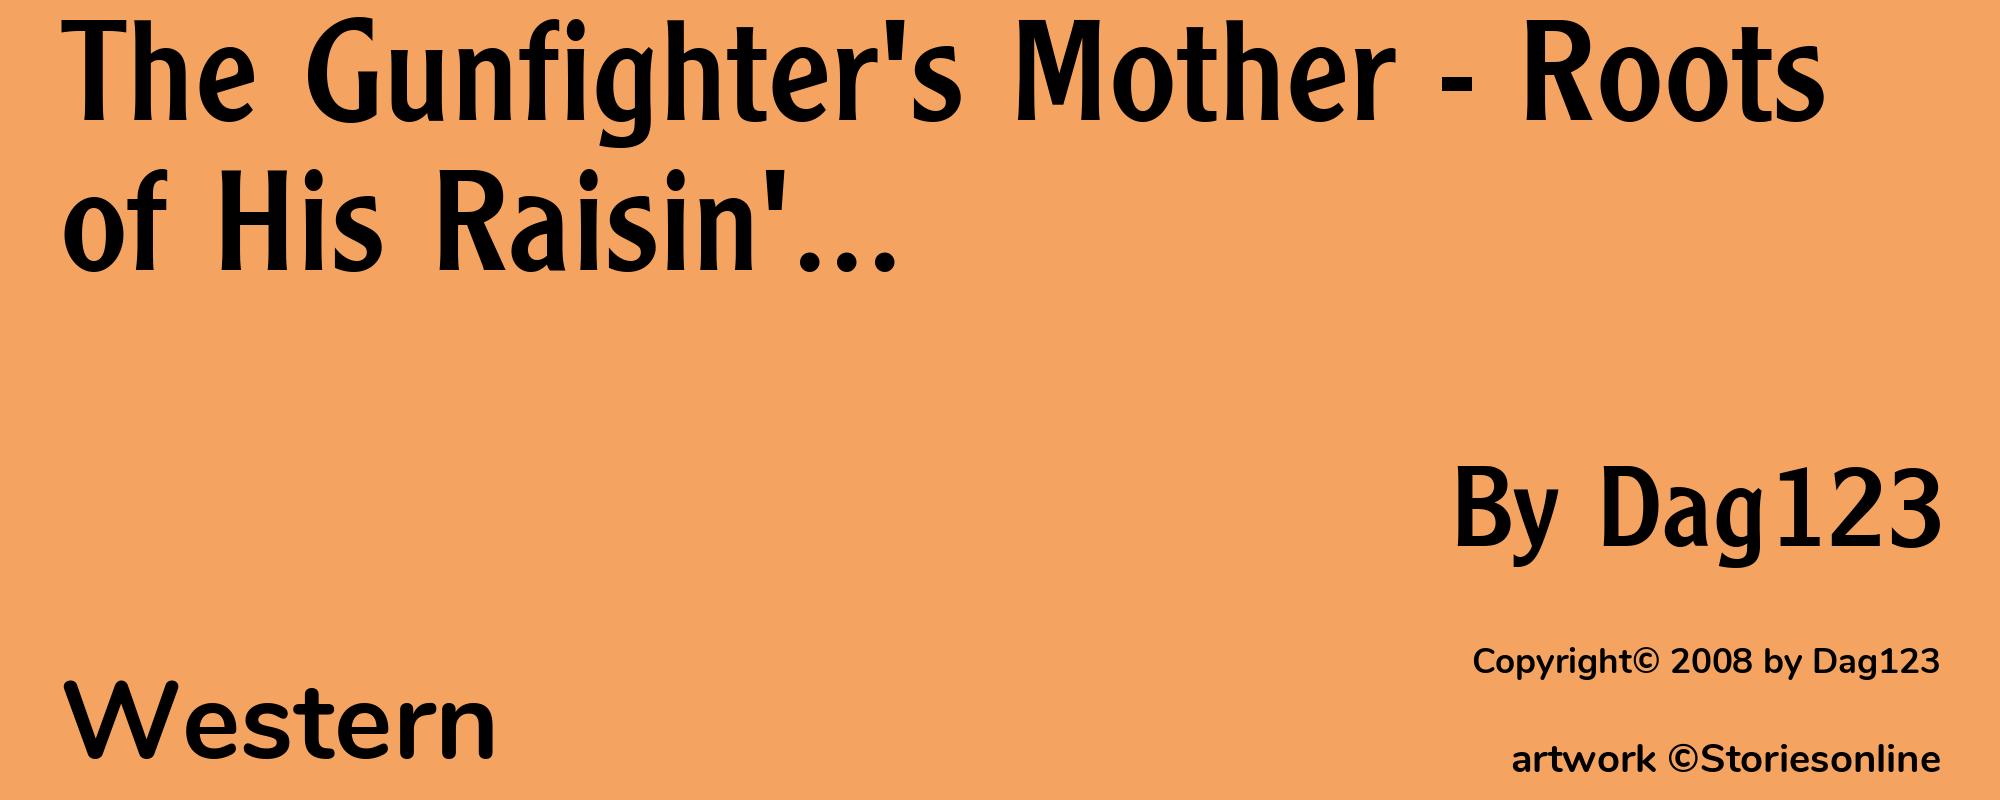 The Gunfighter's Mother - Roots of His Raisin'... - Cover